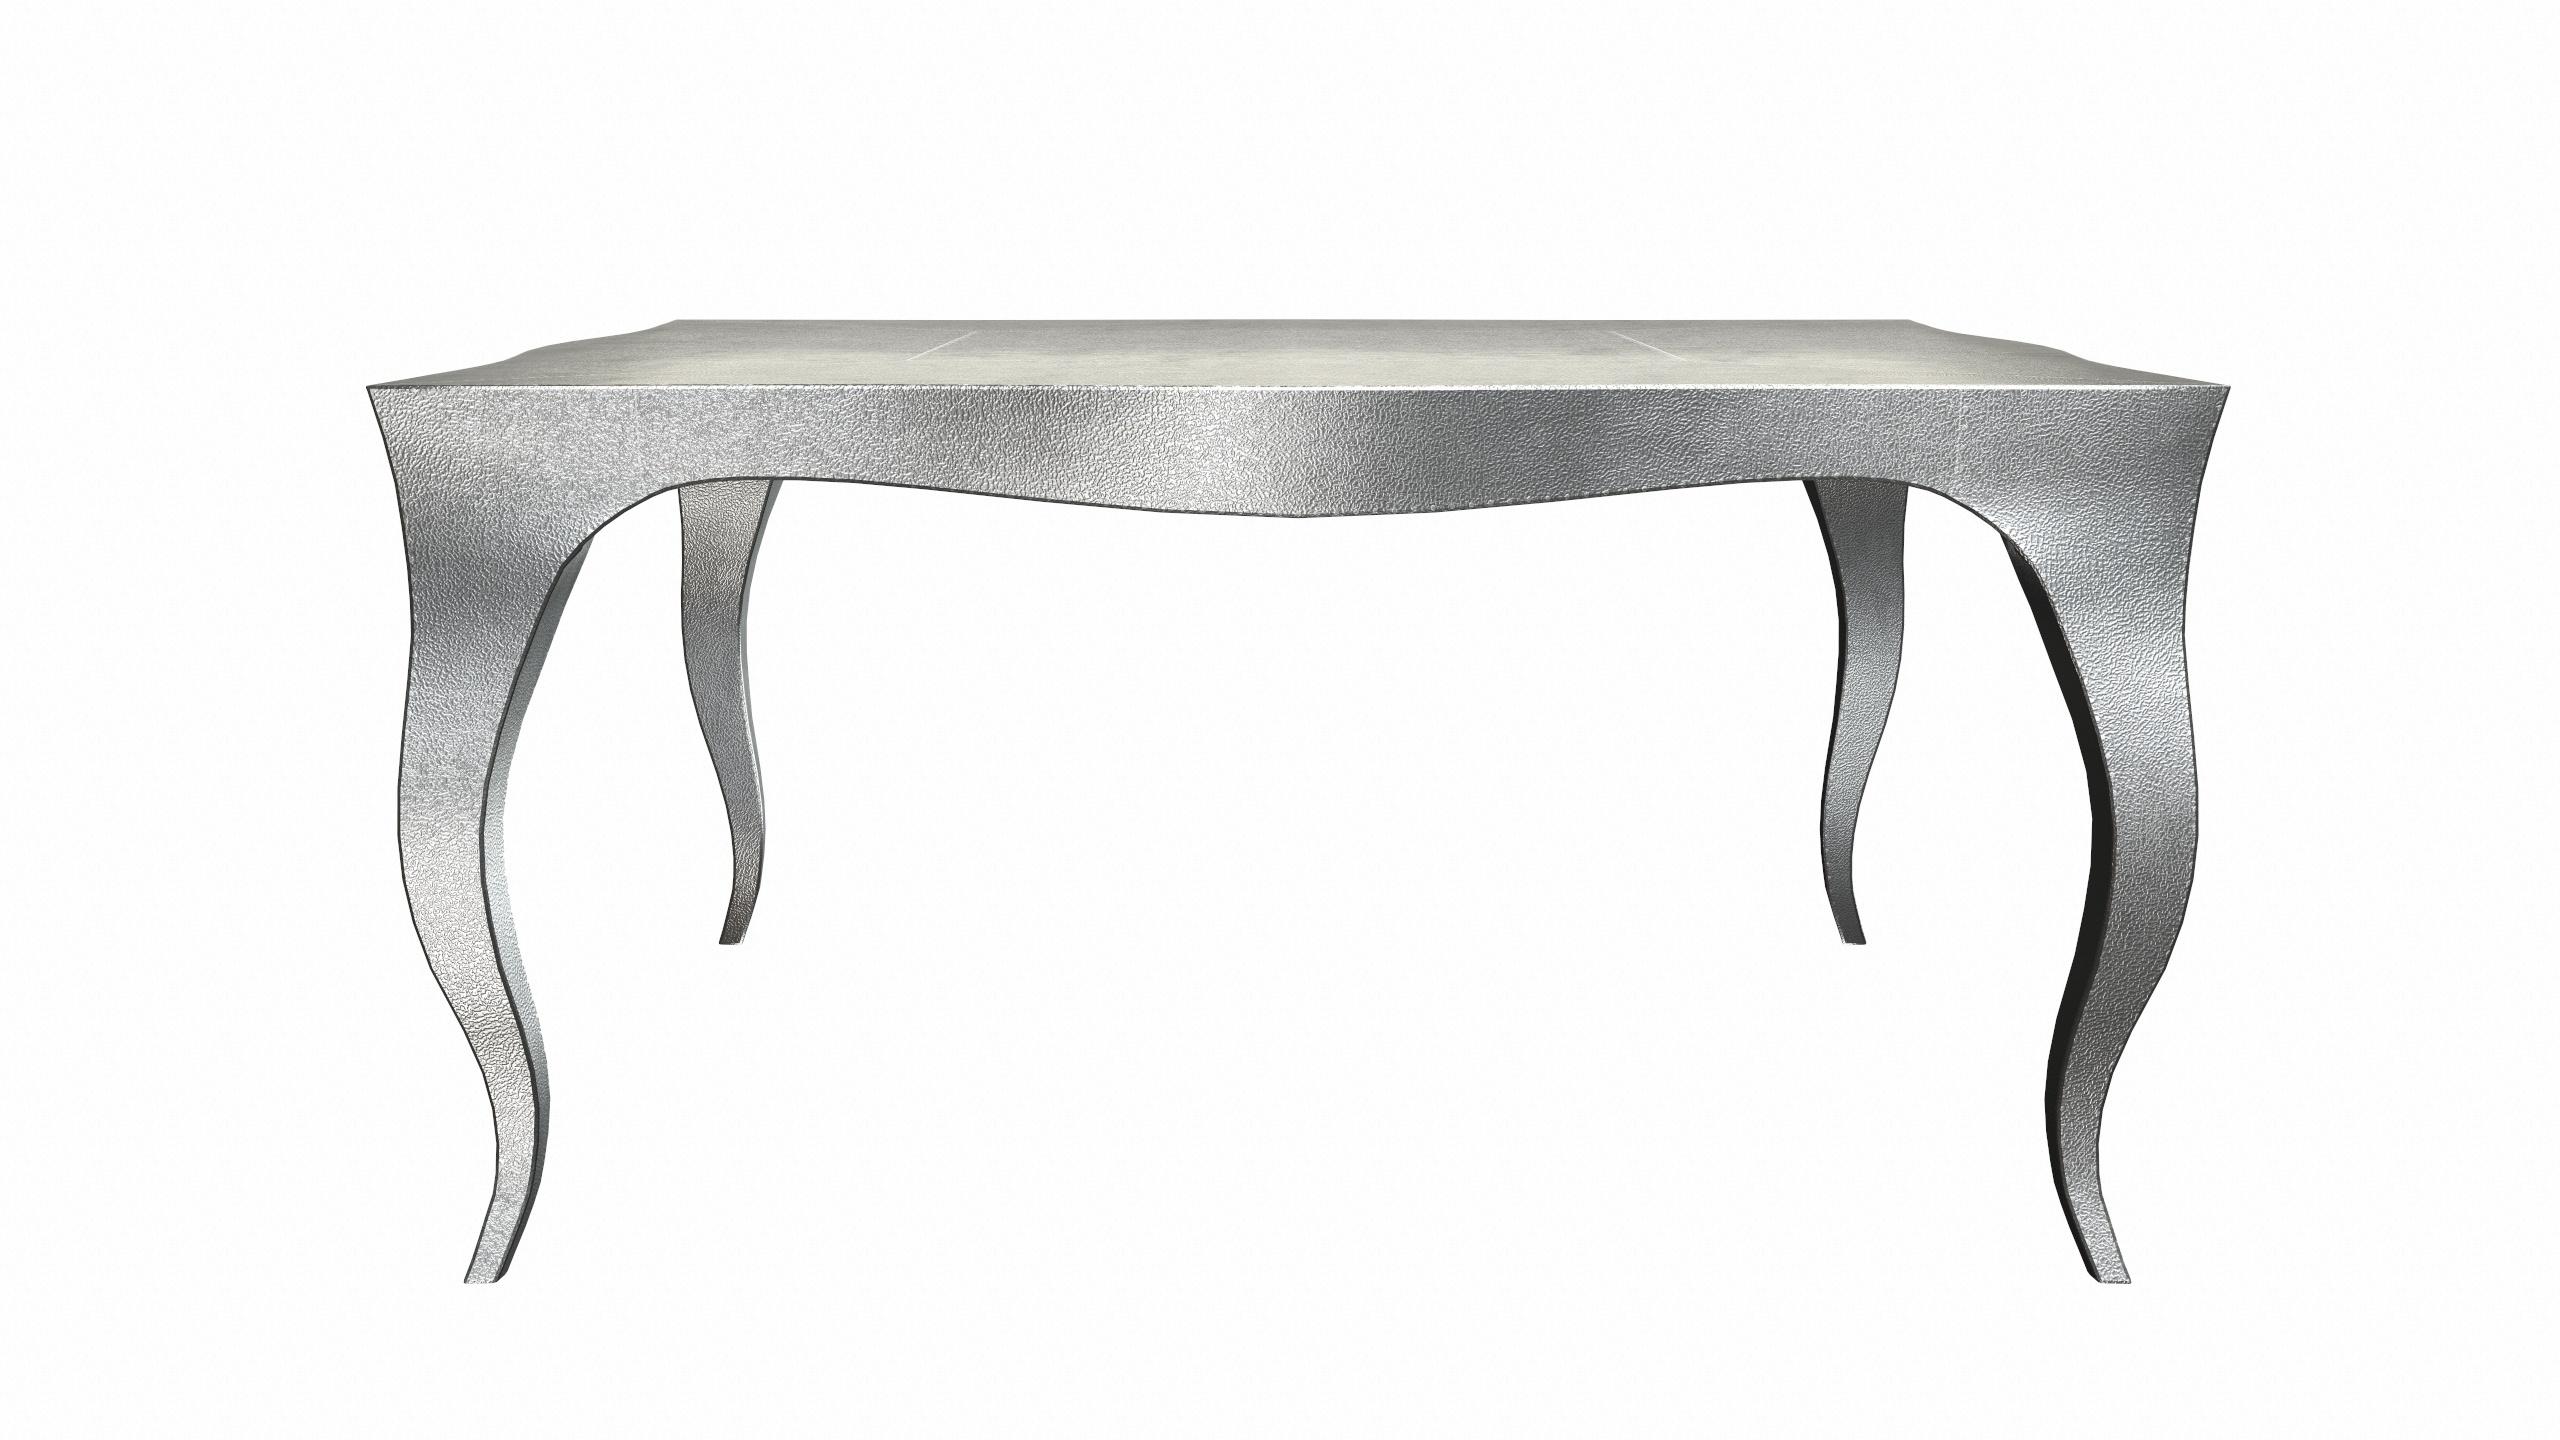 American Louise Art Deco Coffee and Cocktail Tables Fine Hammered White Bronze by Paul M. For Sale